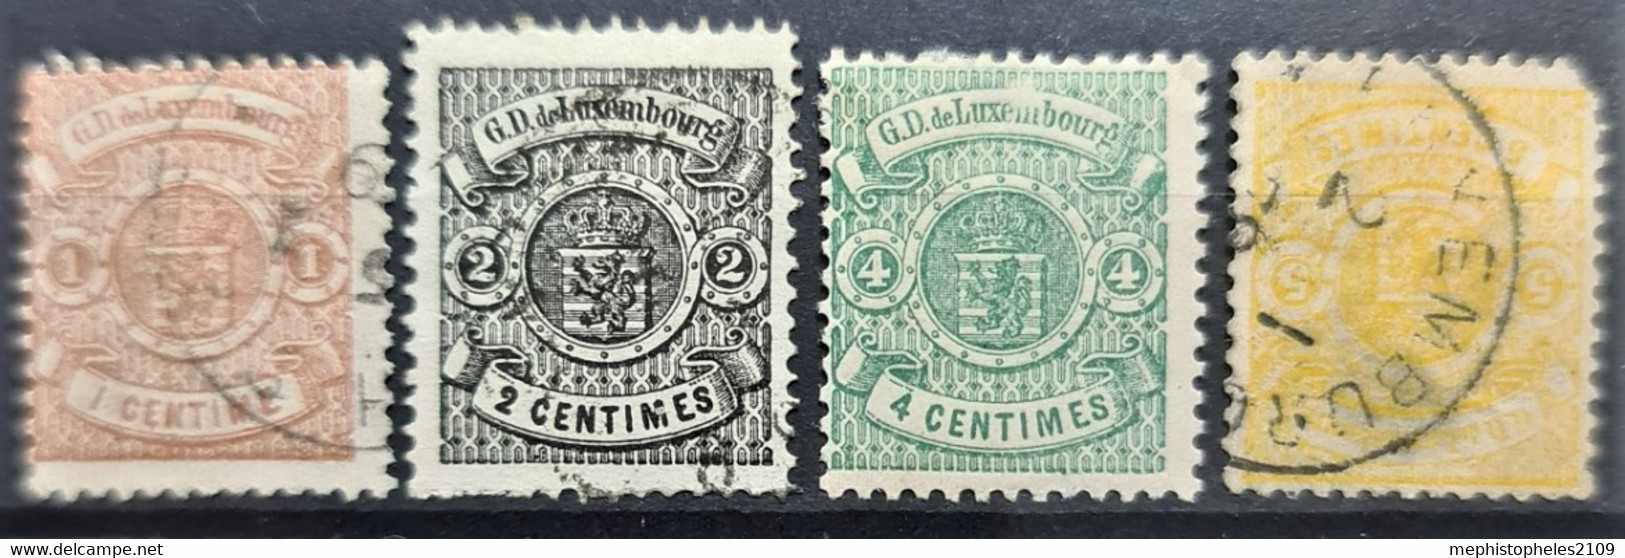 LUXEMBOURG 1876 - MLH/canceled - Sc# 29-32 - 1859-1880 Wapenschild